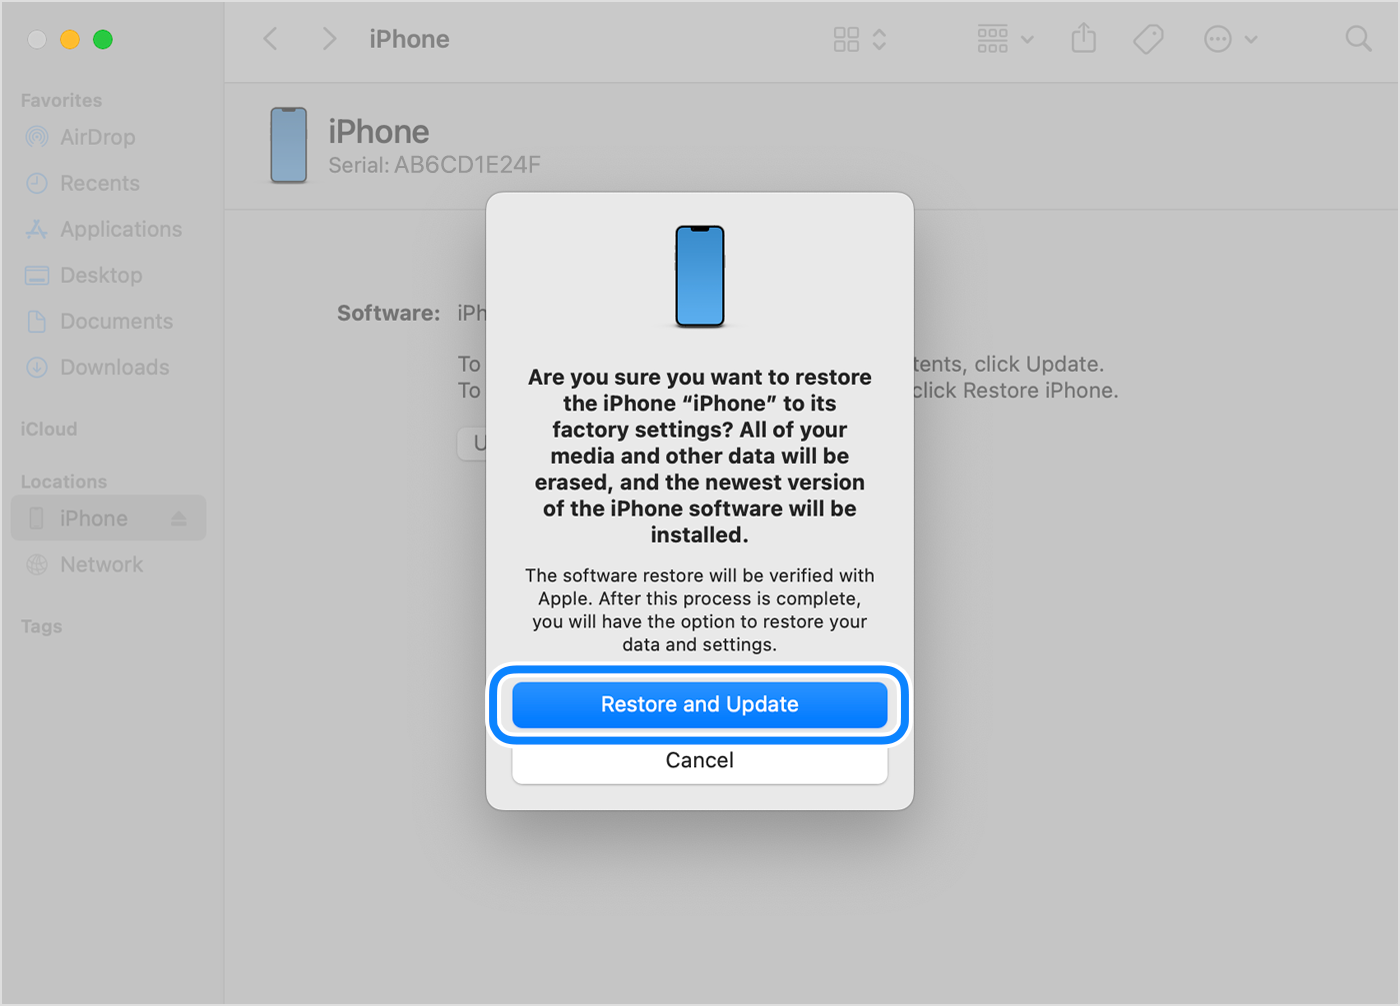 To restore and update your iPhone with your computer, tap Restore and Update to confirm.